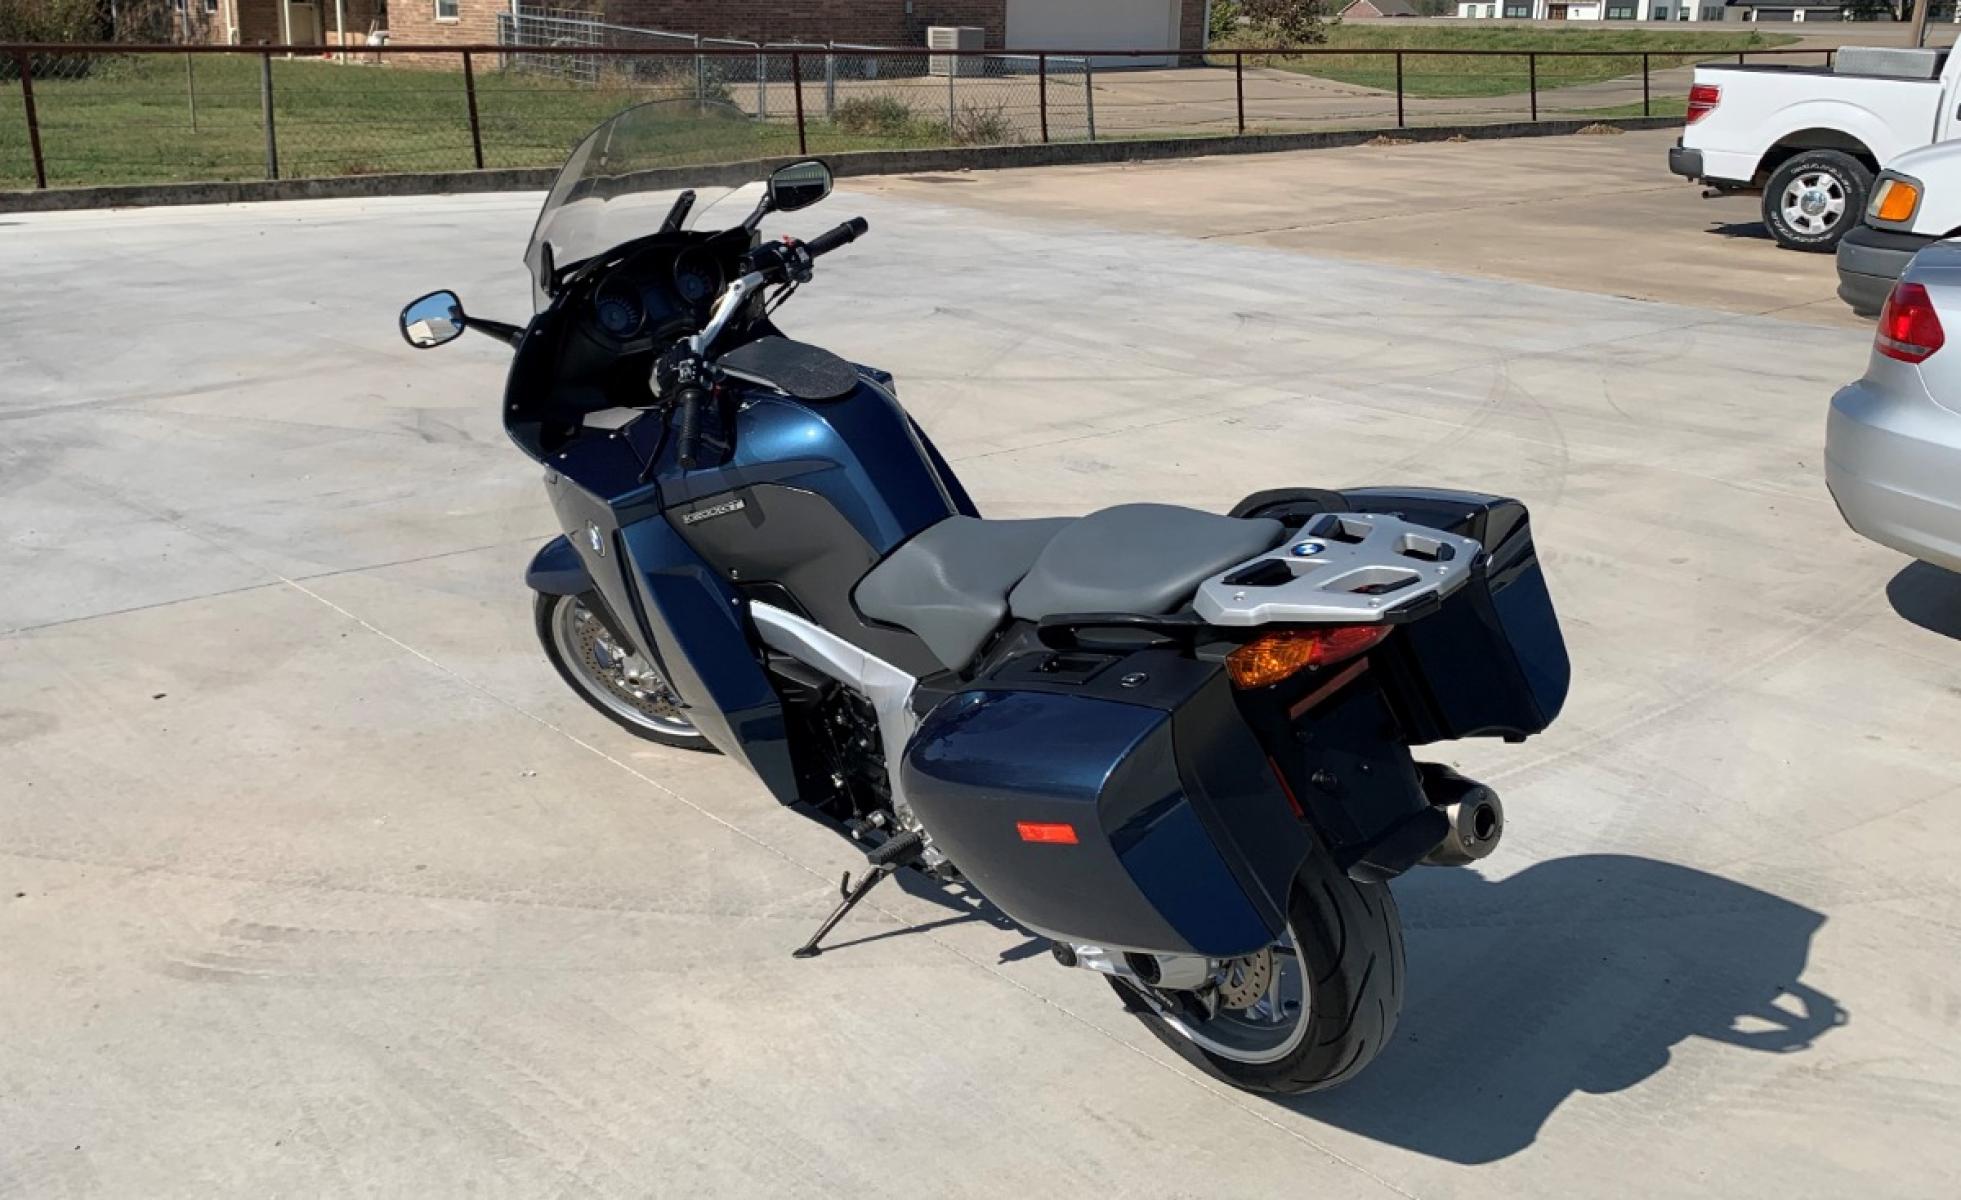 2007 BLUE BMW K1200GT K1200 (WB10597087Z) with an 1157CC engine, located at 17760 HWY 62, MORRIS, 74445, 35.609104, -95.877060 - THE 2007 BMW K1200GT IS A SPORT-TOURING MOTORCYCLE MADE BY BMW. THE SECOND GENERATION K1200GT, INTRODUCED IN 2006, USES ESSENTULY THE SAME INLINE-4 ENGINE AS THE BMW K1200S SPORTSBIKE, WHICH HELD THE WORLD SPEED RECORD IN 2005 FOR ITS CLASS AT 279.33 km/h (173.57 mph), AND THE K1200R. THE NEW MODEL - Photo #6